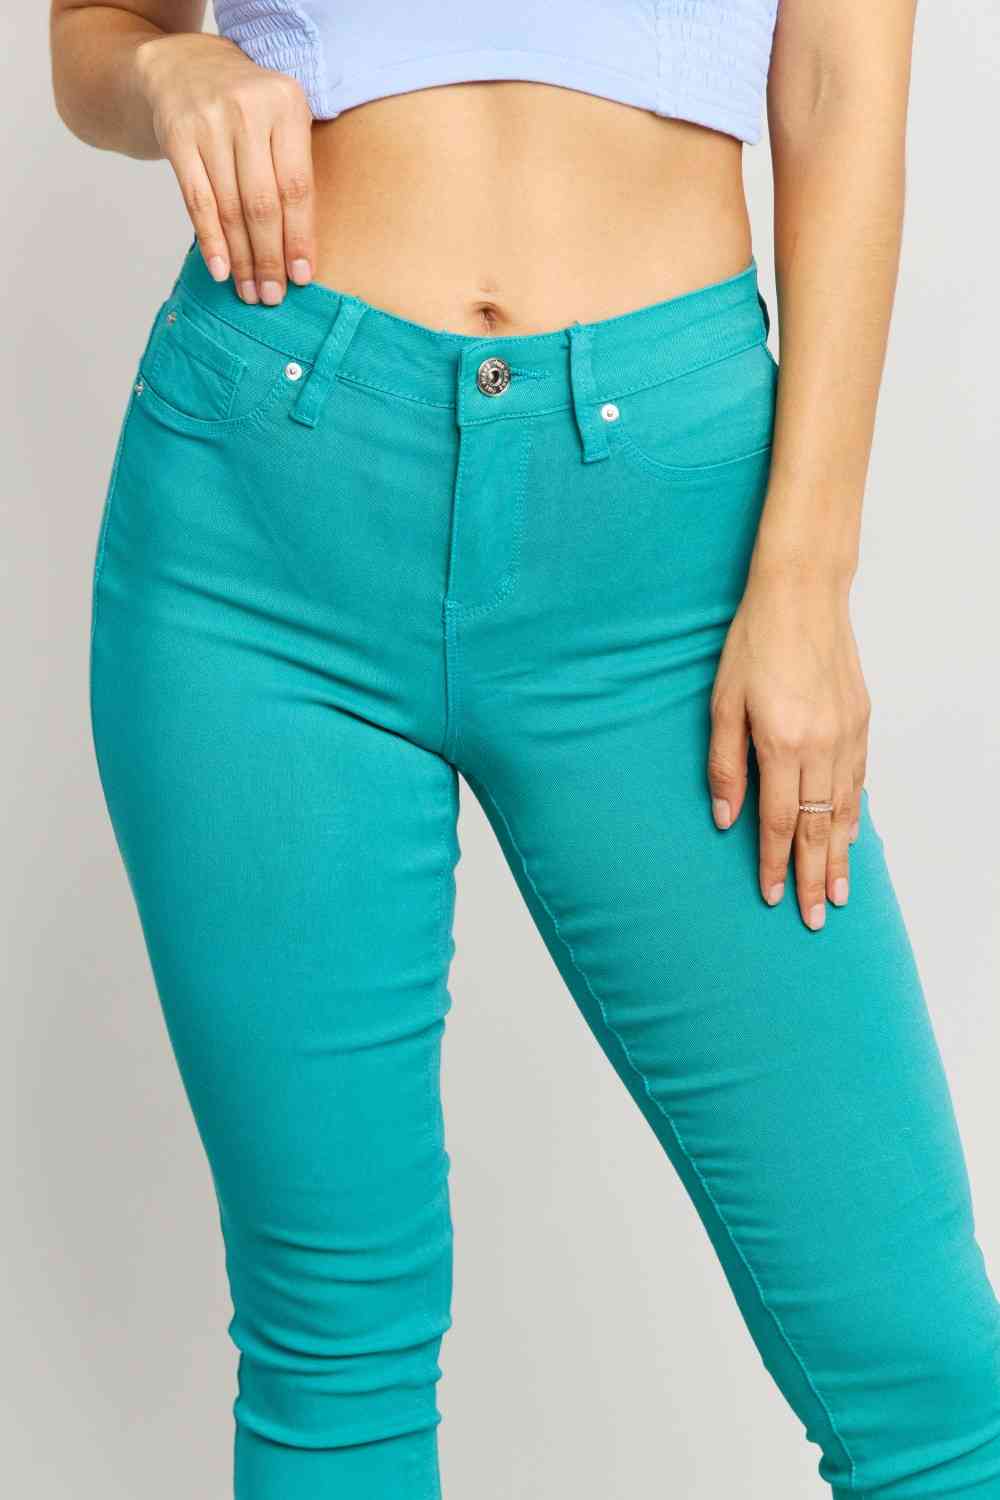 YMI Jeanswear Kate Hyper-Stretch Full Size Mid-Rise Skinny Jeans in Sea Green - AFFORDABLE MARKET